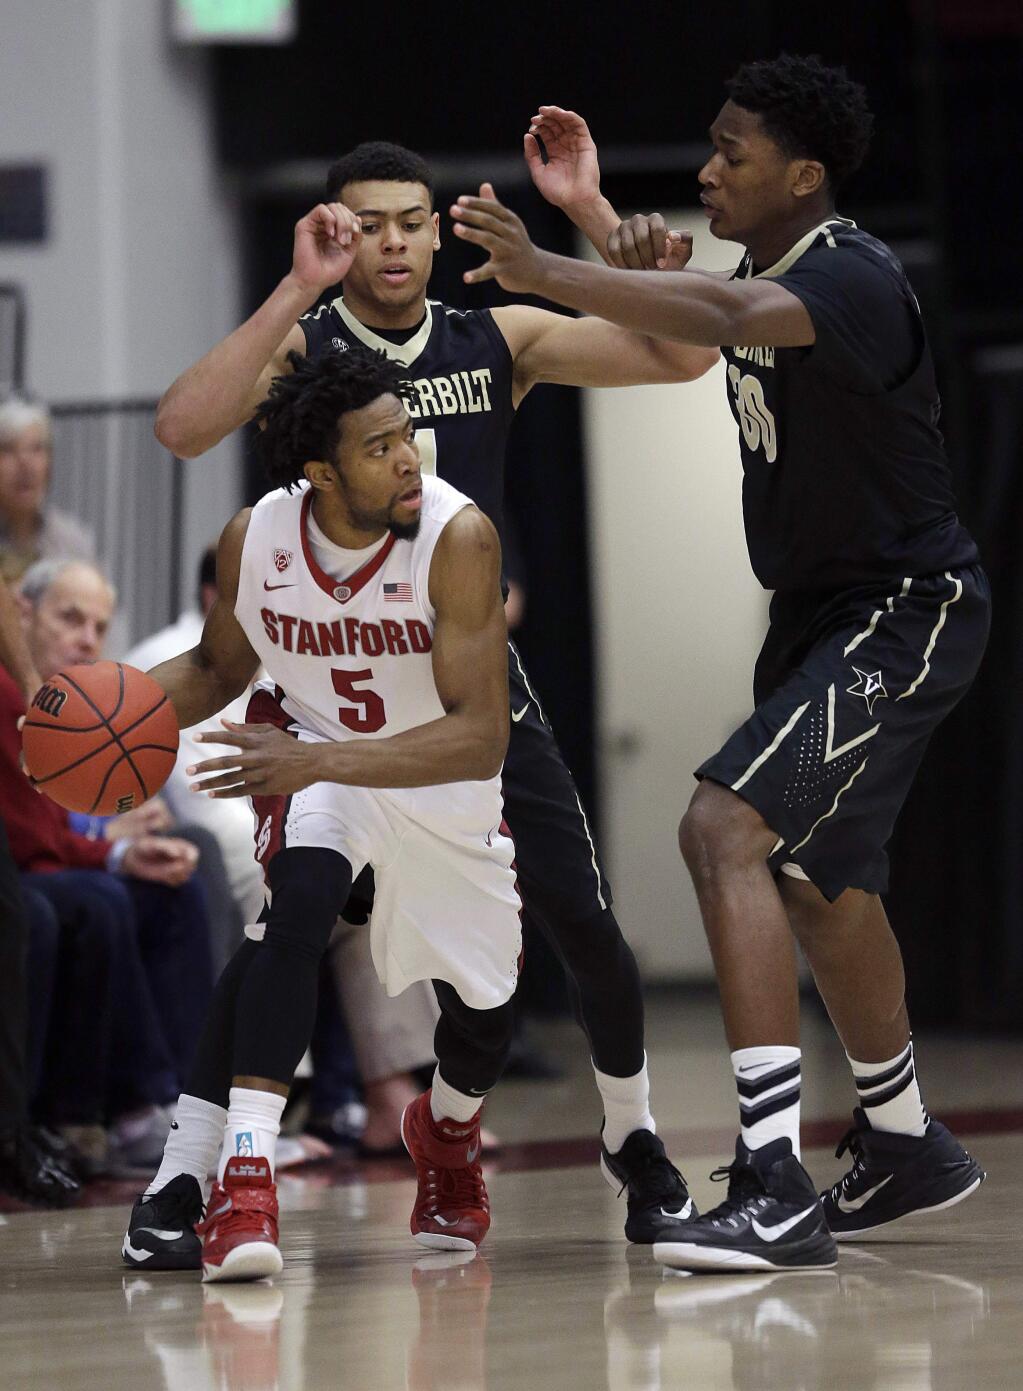 Stanford's Chasson Randle (5) dribbles as he is guarded by Vanderbilt's Wade Baldwin IV, rear, and Damian Jones during the first half of an NCAA college basketball game in the National Invitation Tournament in Stanford, Calif., Tuesday, March 24, 2015. (AP Photo/Jeff Chiu)